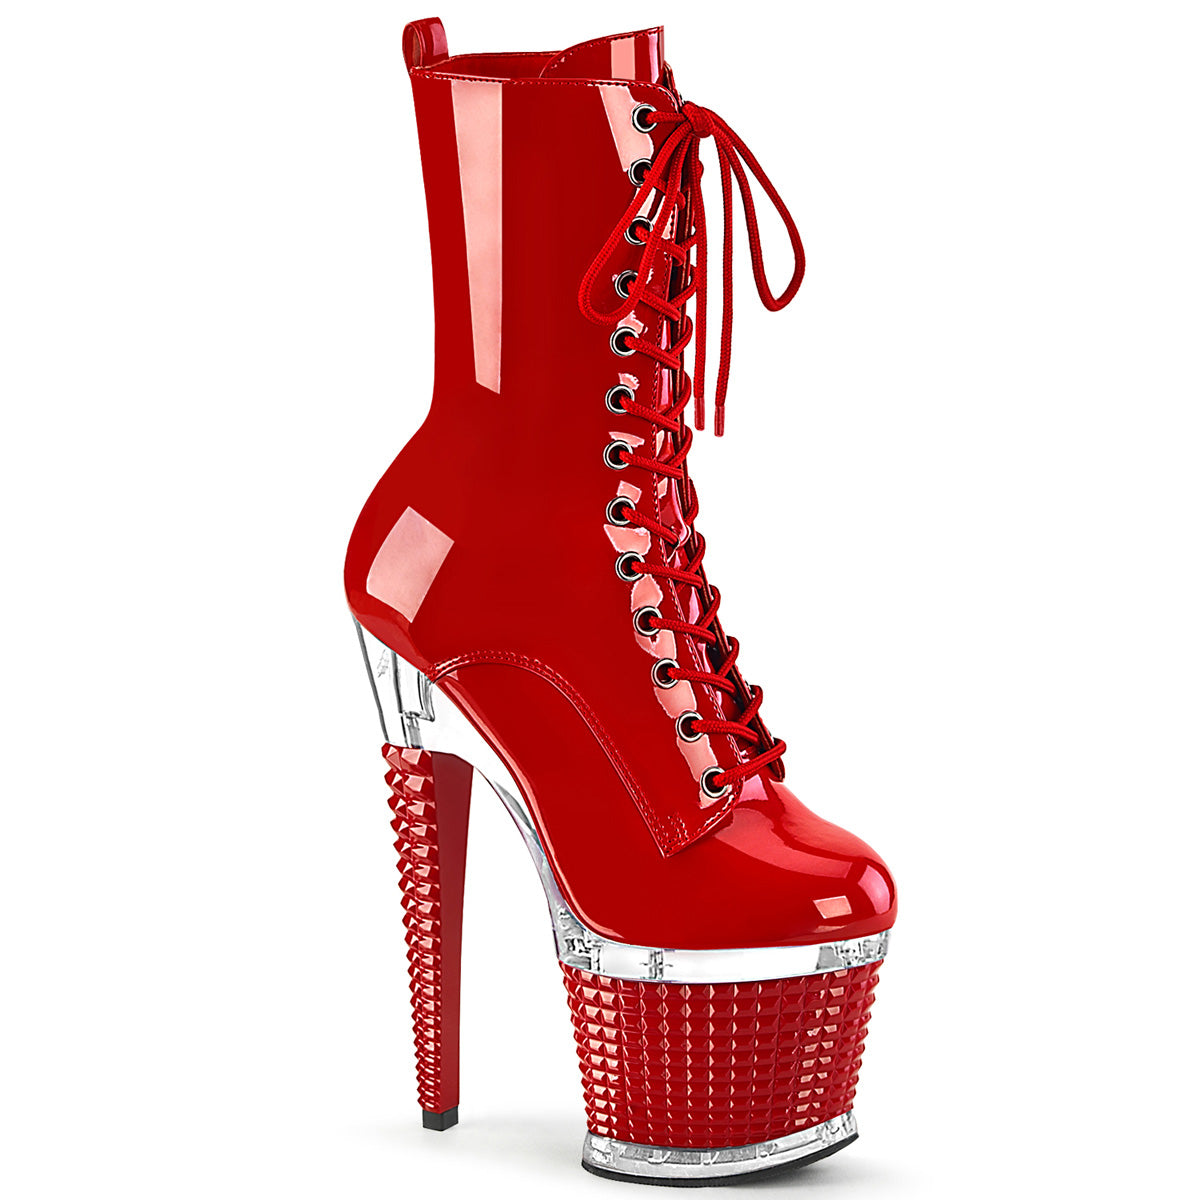 SPECTATOR-1040 Pleasers Red Patent Lace Up Platform Ankle Boots – Pole ...